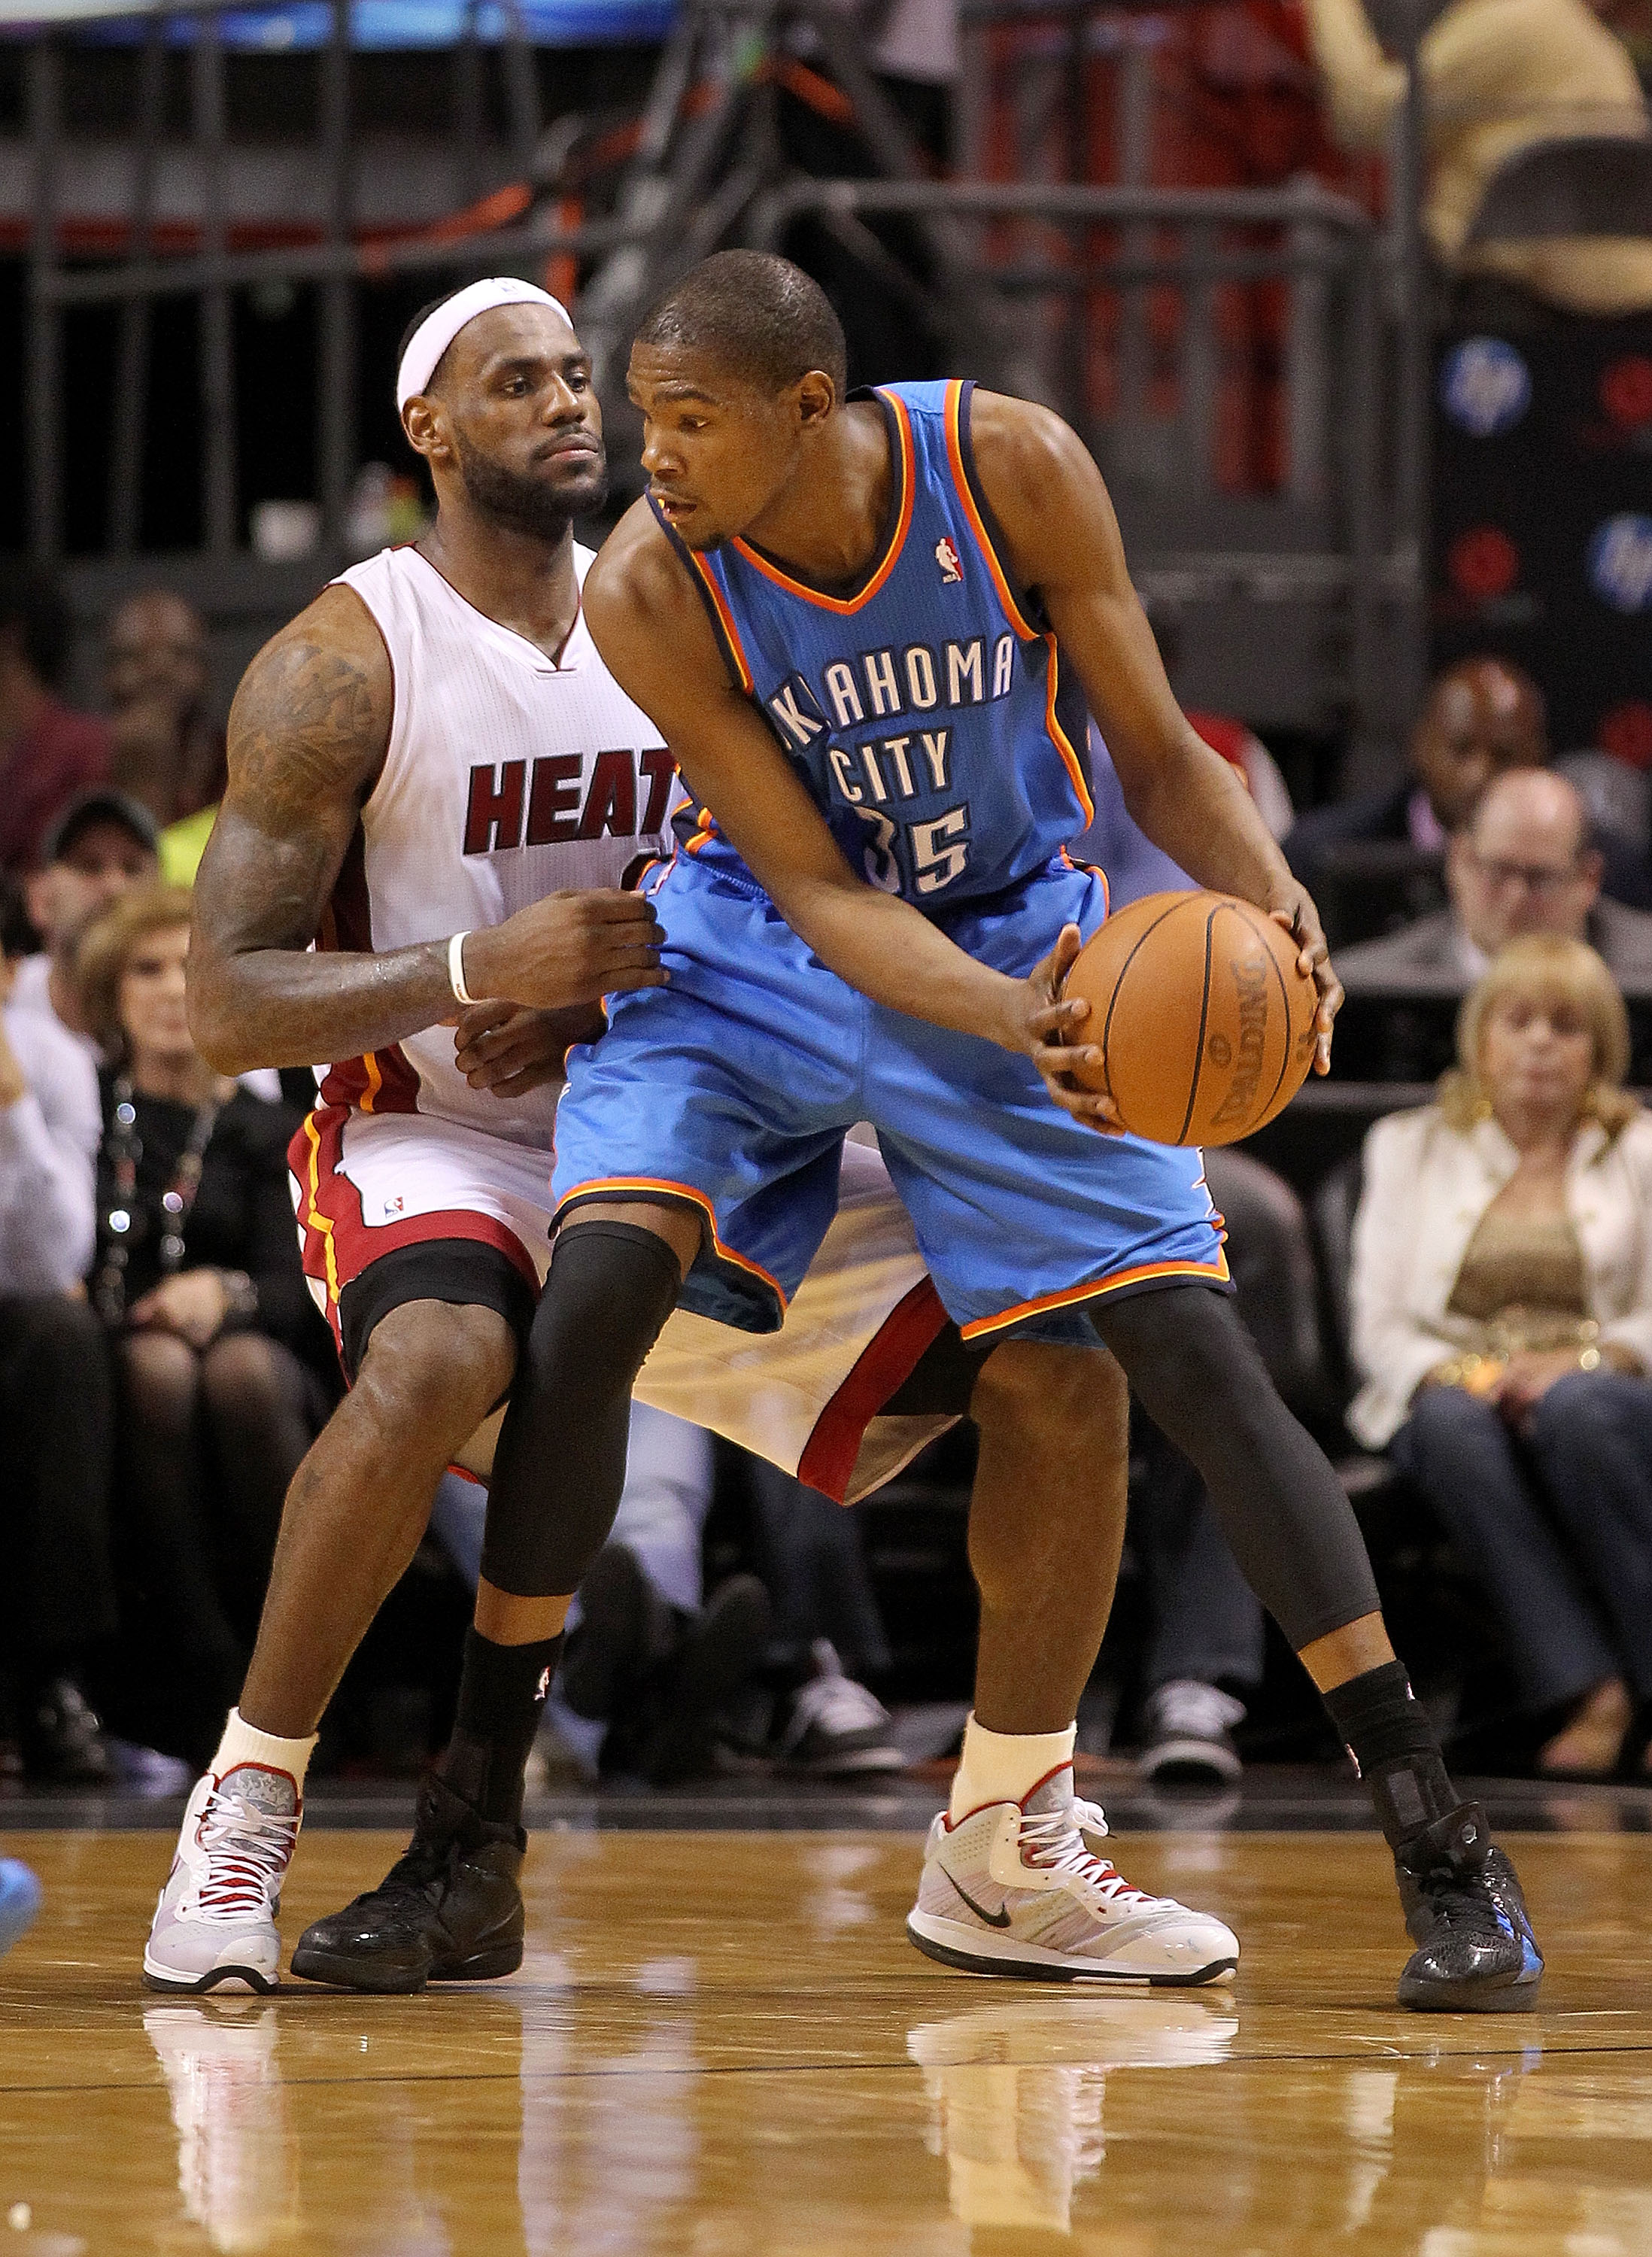 NBA: Ranking the top 30 small forwards